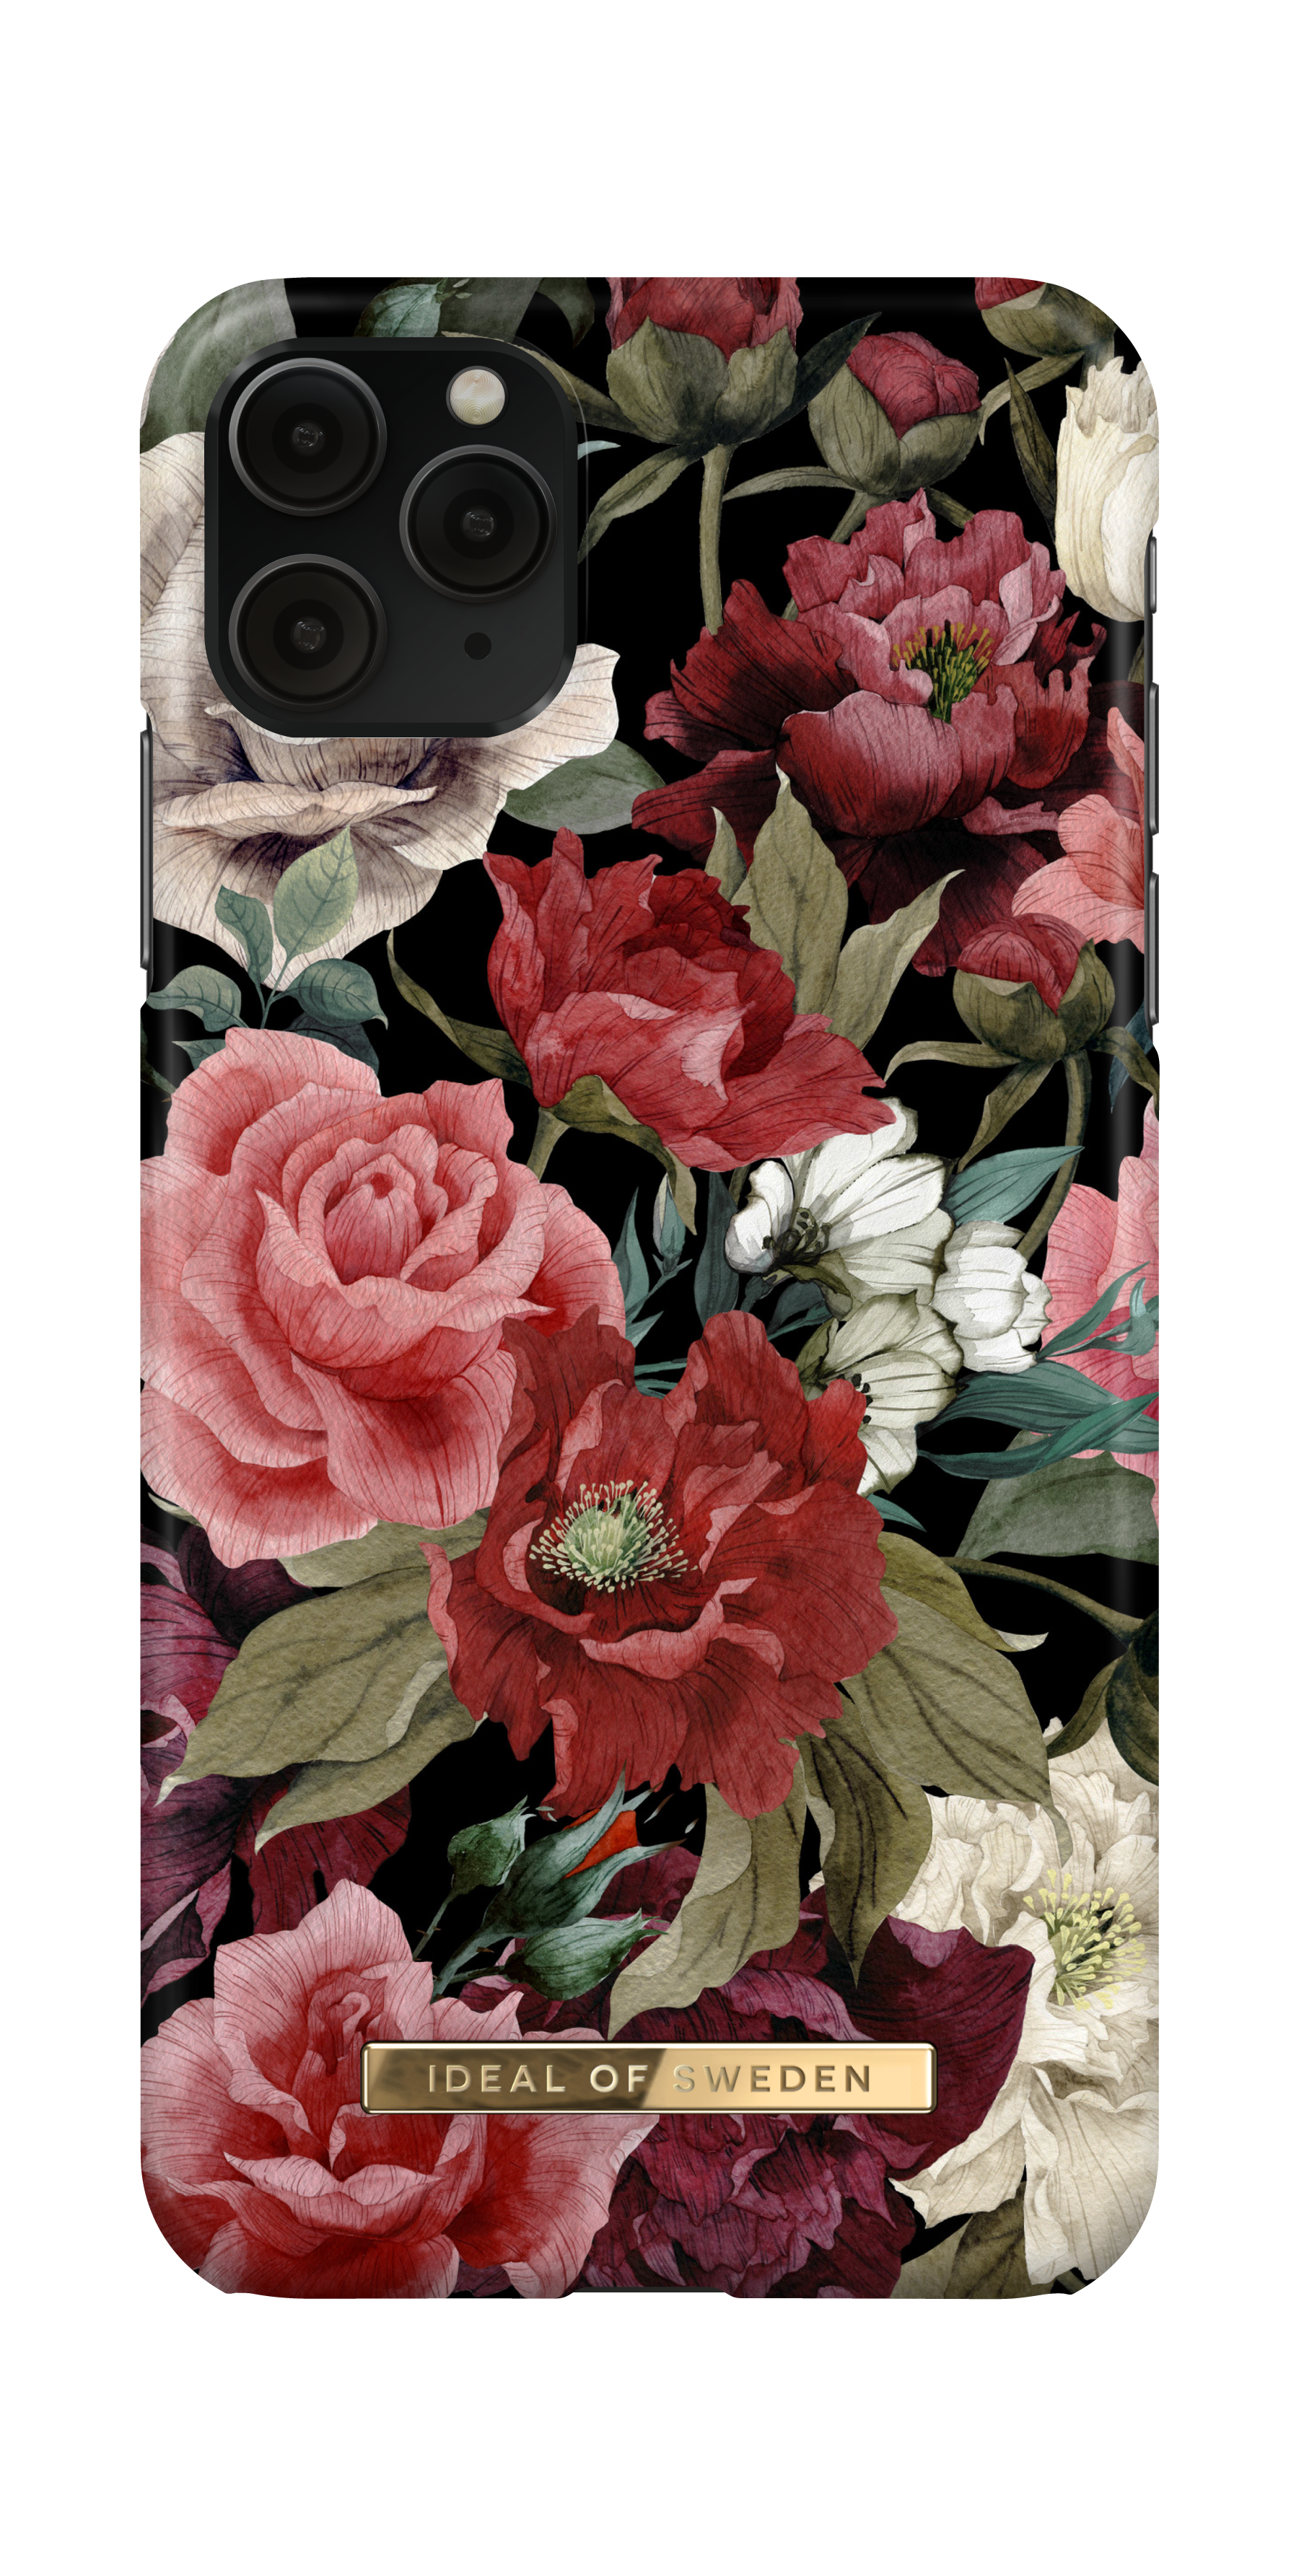 11 Apple, IDFCS17-I1965-63, XS IDEAL Max, iPhone OF SWEDEN Antique Backcover, iPhone Roses Pro Max,